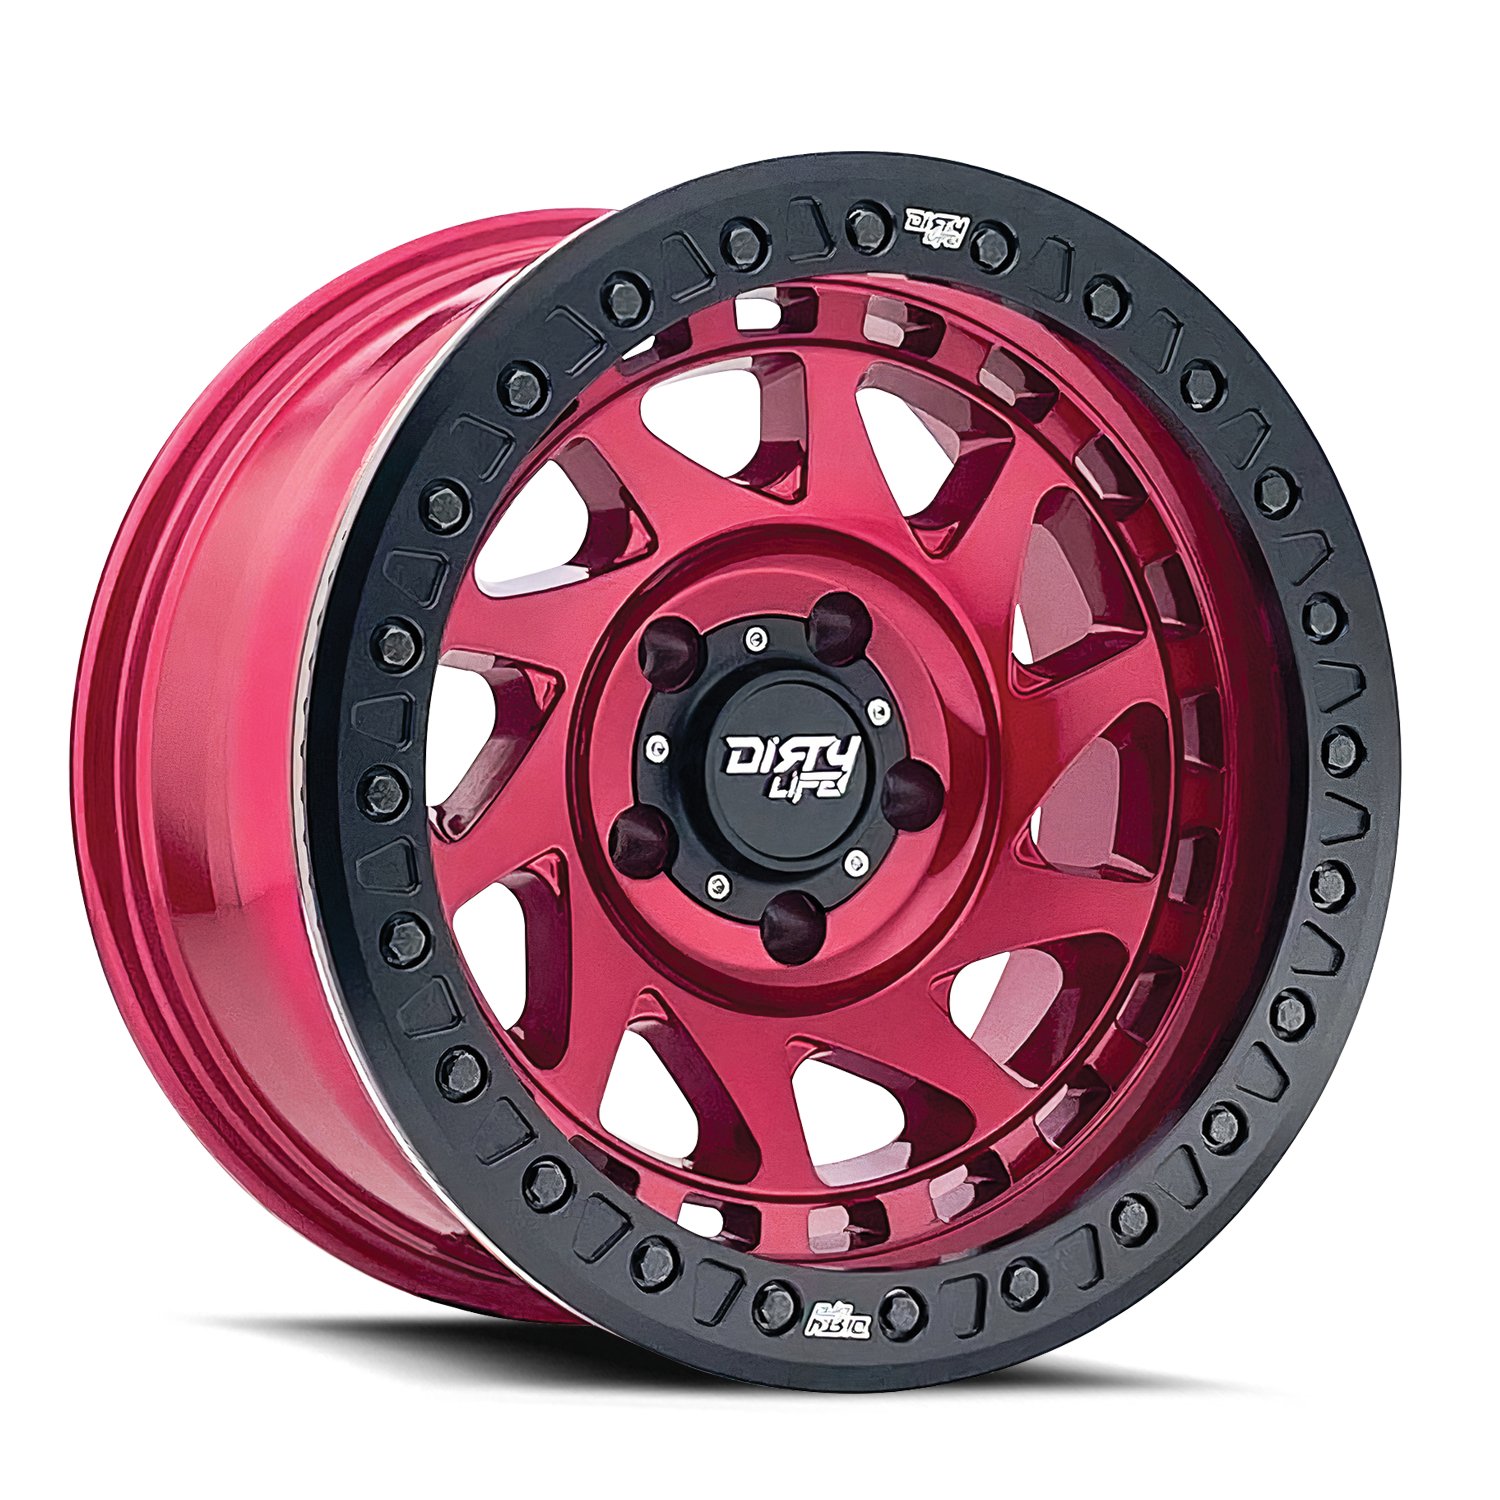 ENIGMA RACE 9313 Wheel Size: 17 X 9" Bolt Pattern: 8-165.1 [CRIMSON CANDY RED]